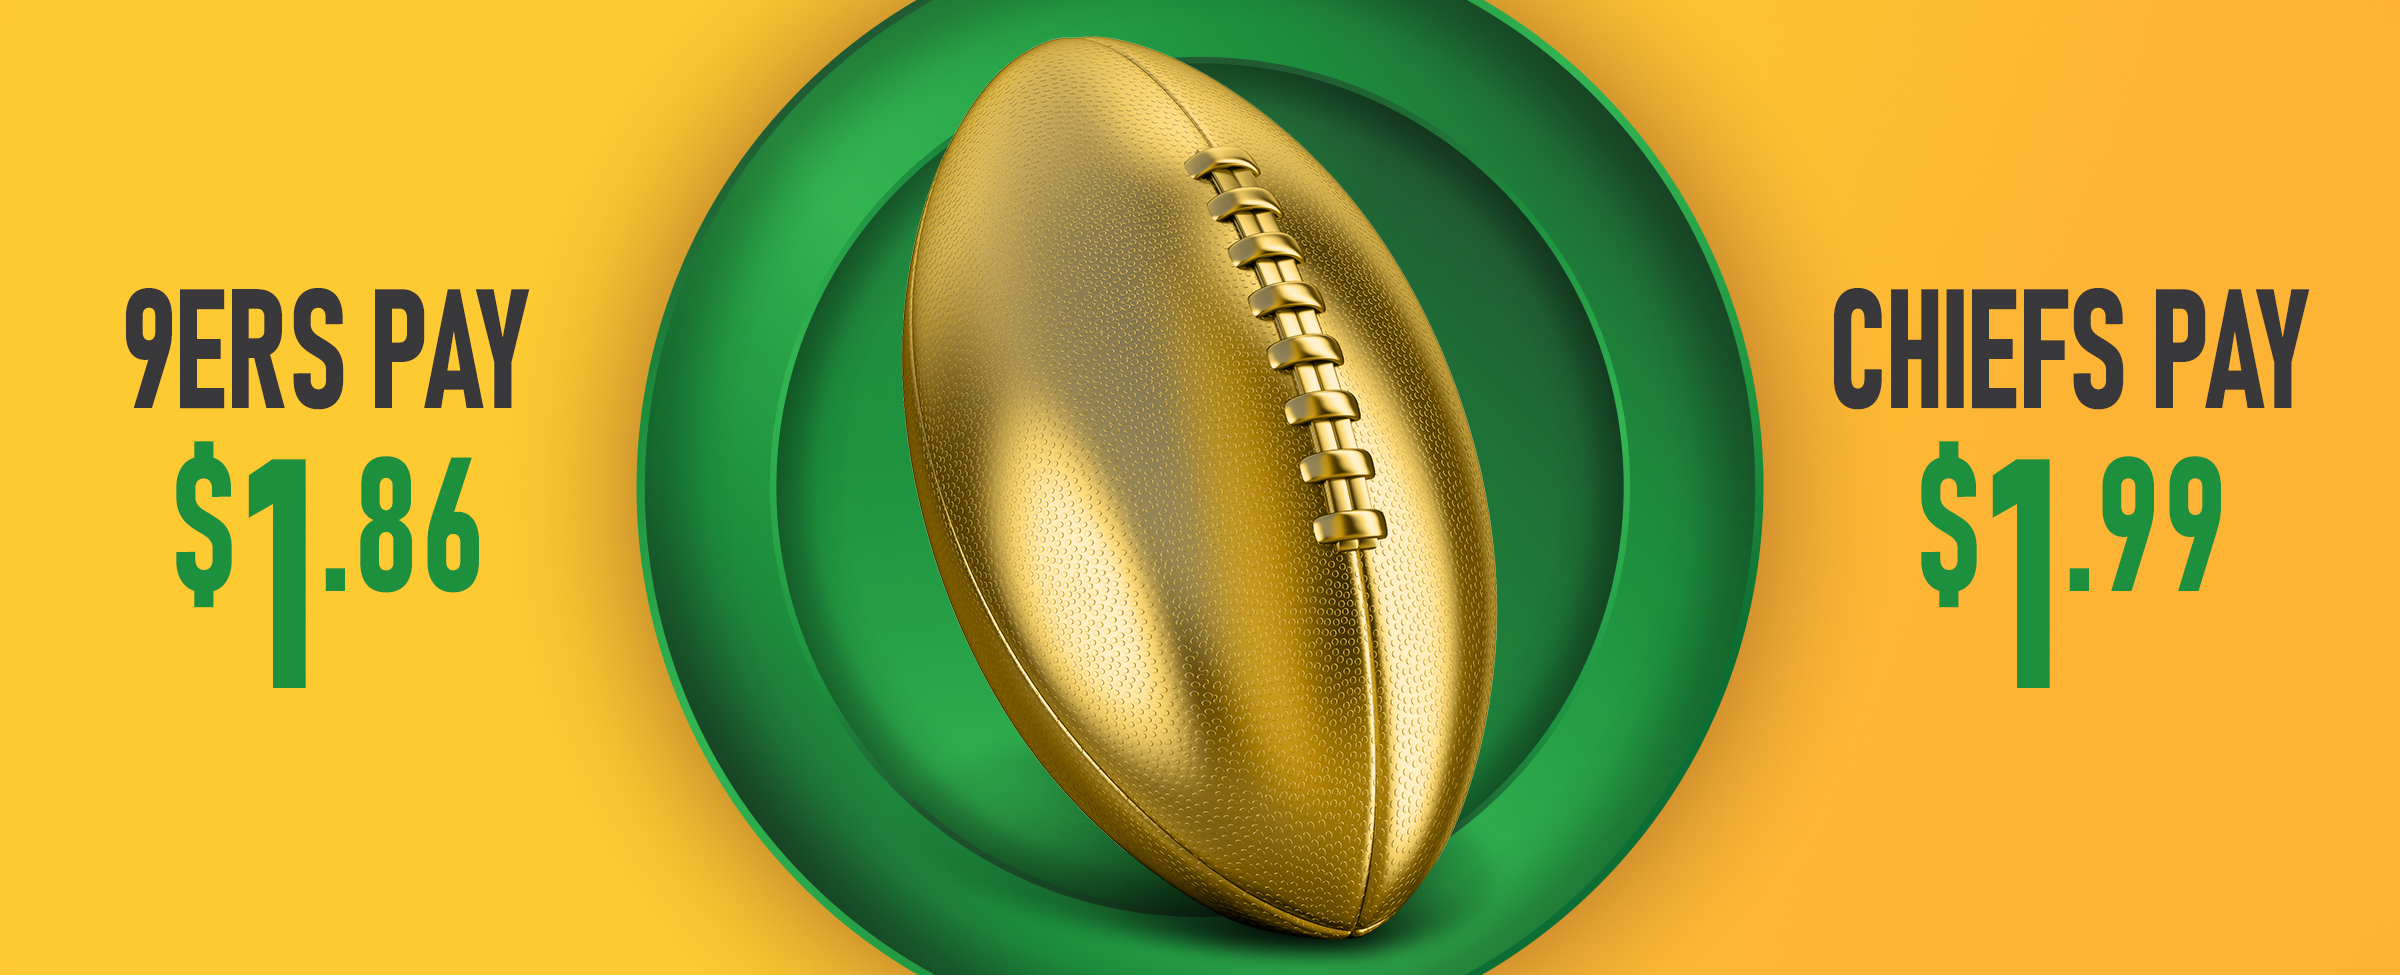 A gold gridiron football plus the odds for the 9ers and Chiefs on a yellow background